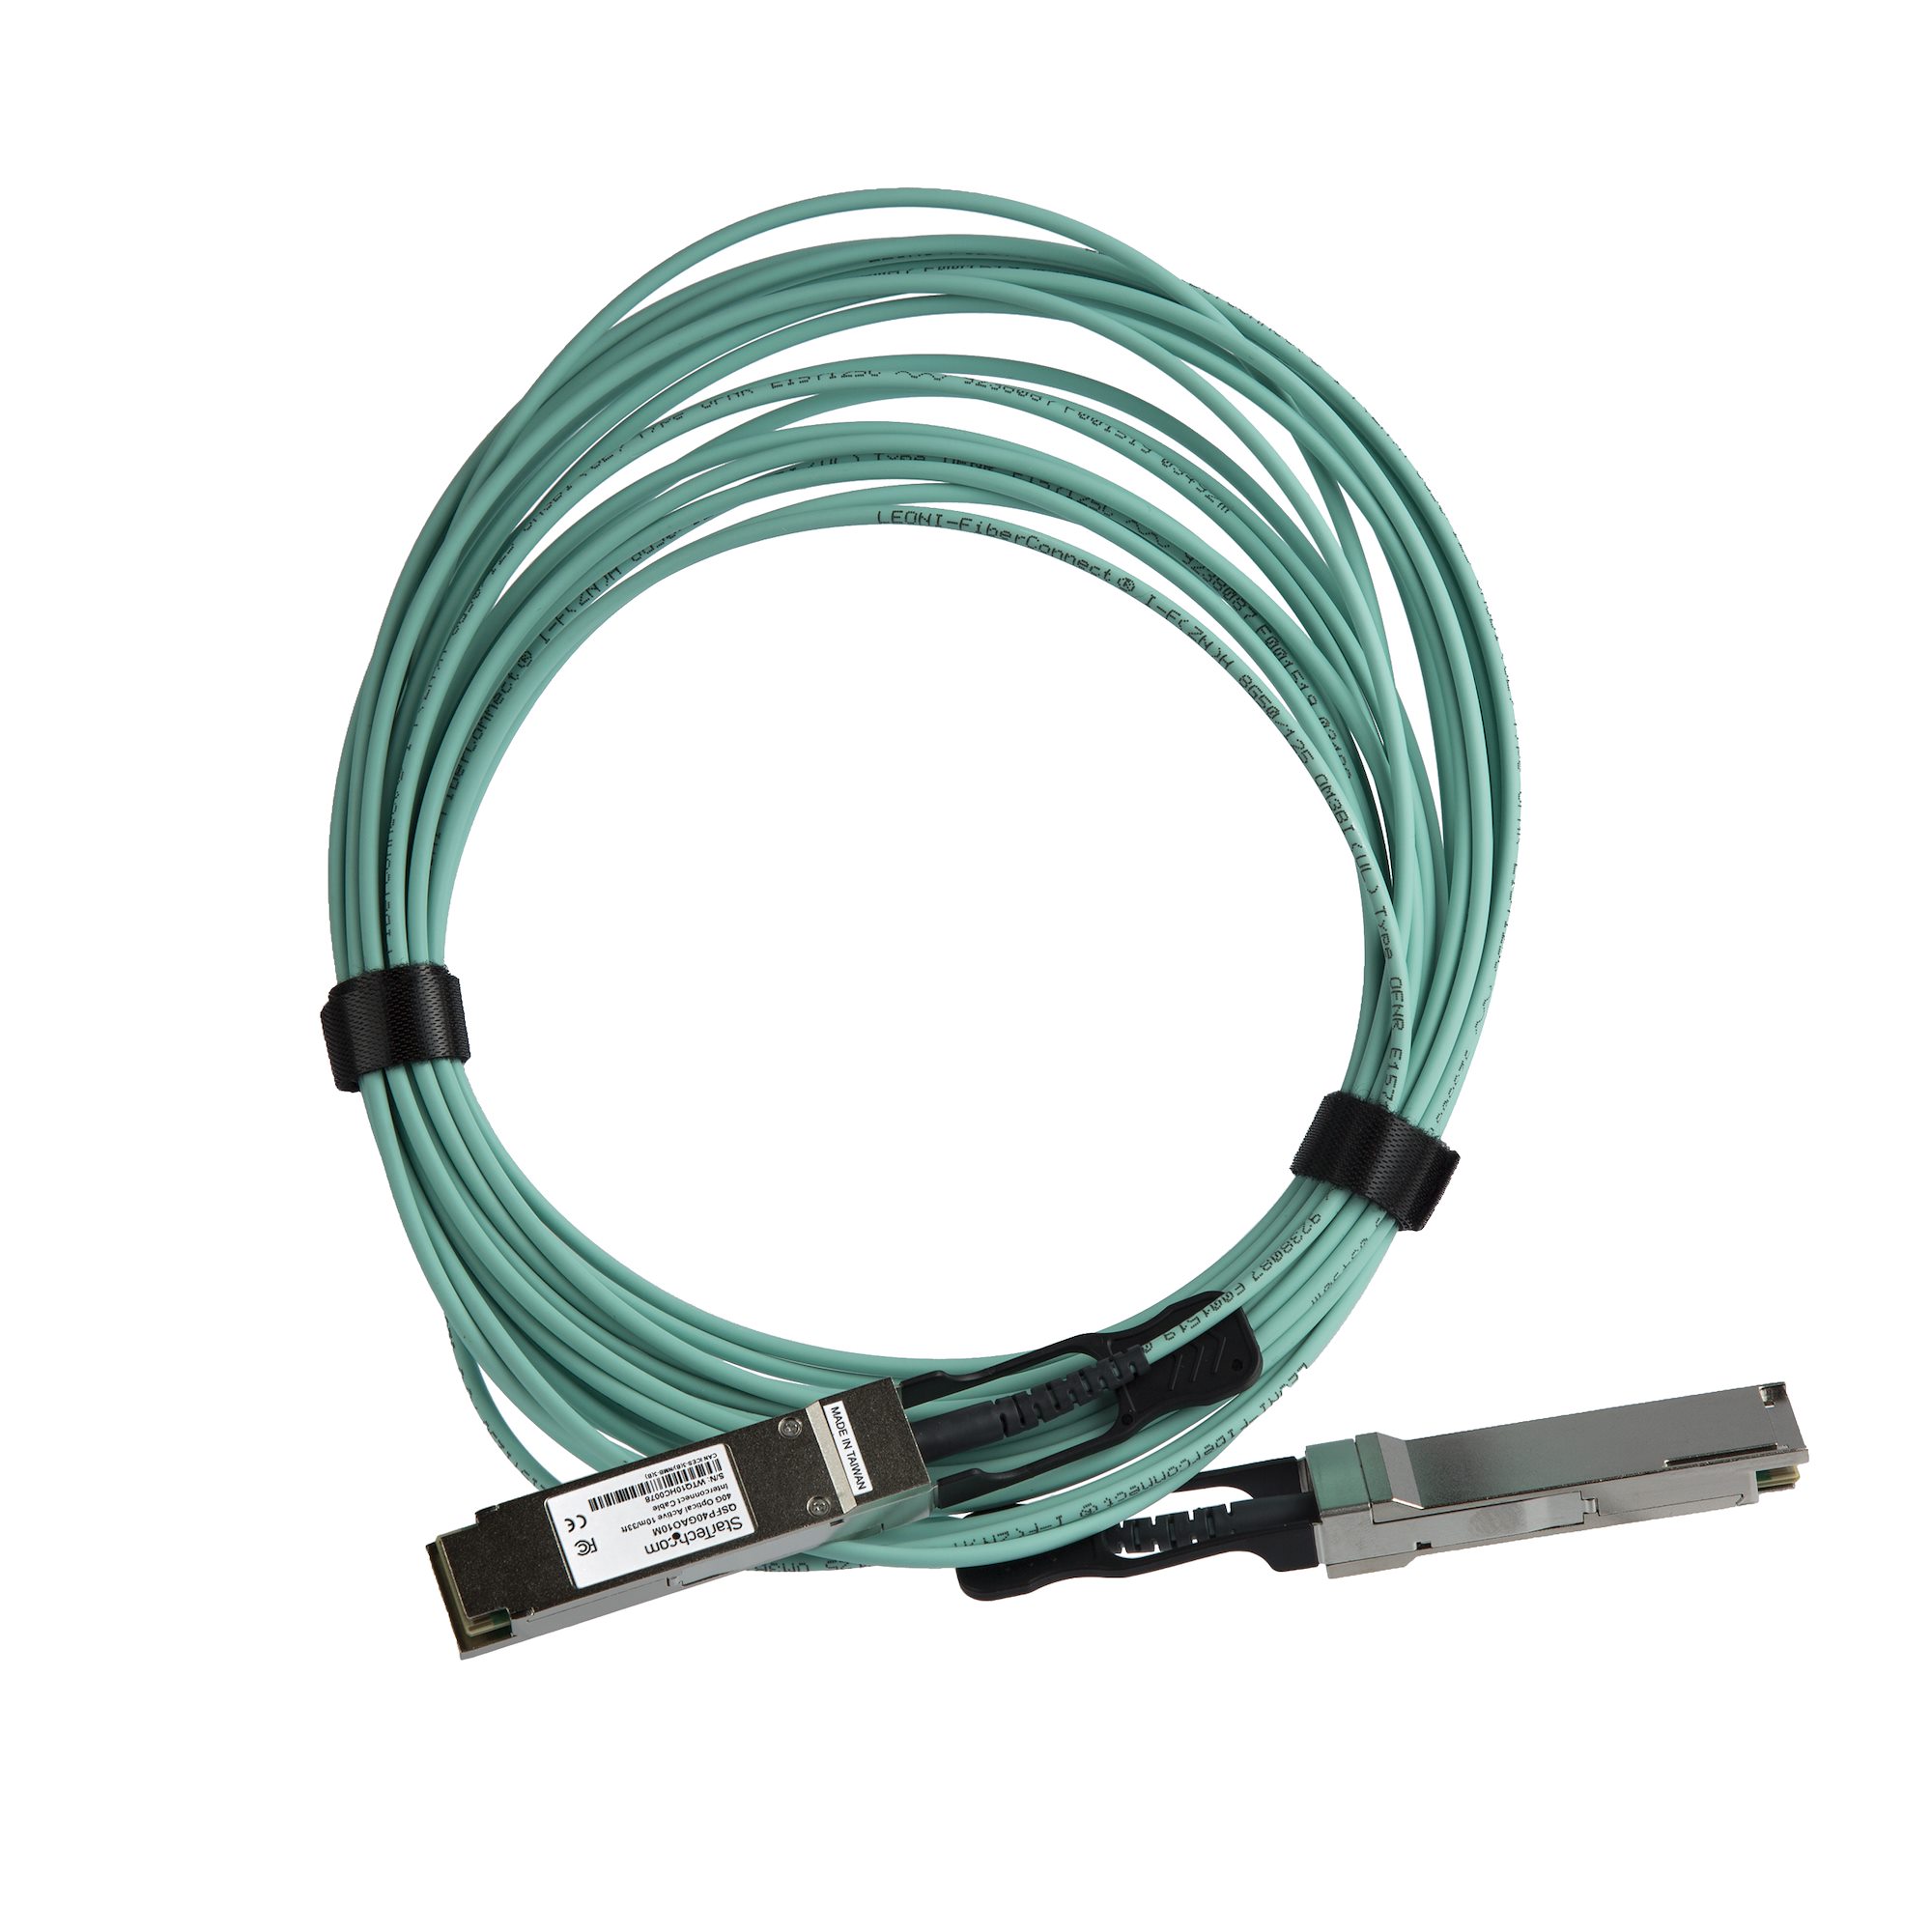 32.8' QSFP+ AOC - MSA Uncoded - SFP Cables